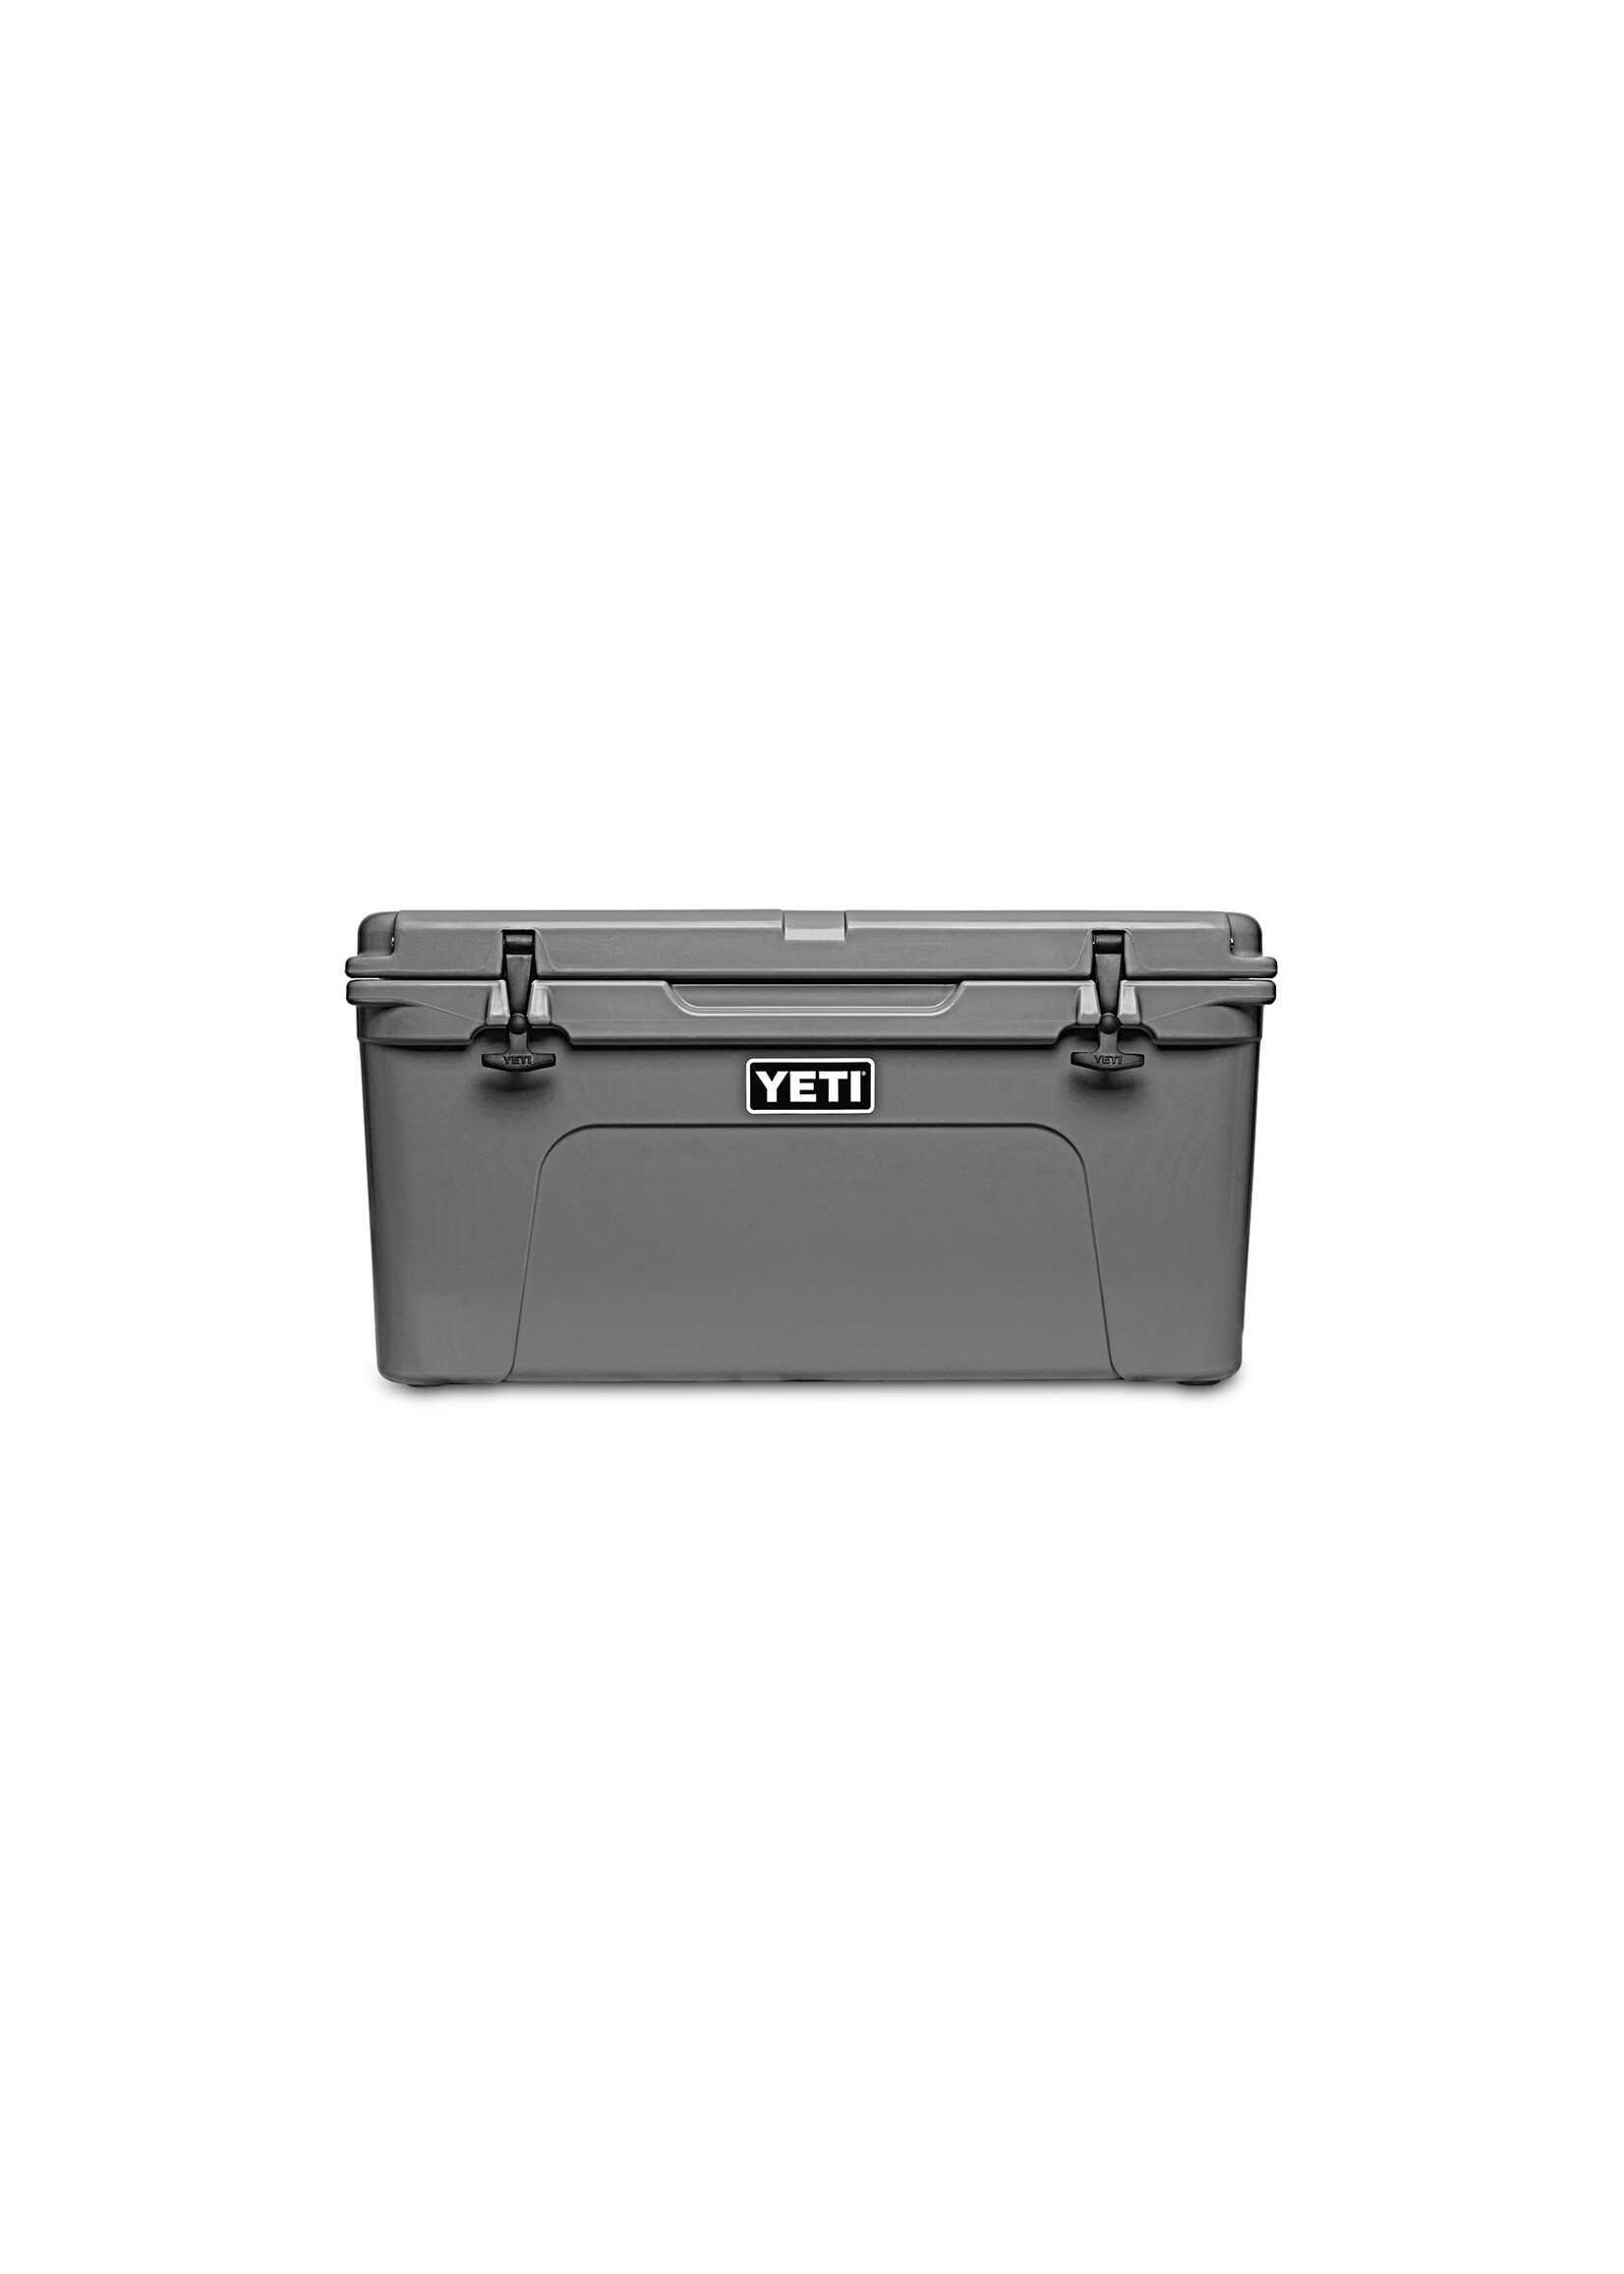 YETI Tundra 65 Cooler in Charcoal – Occasionally Yours